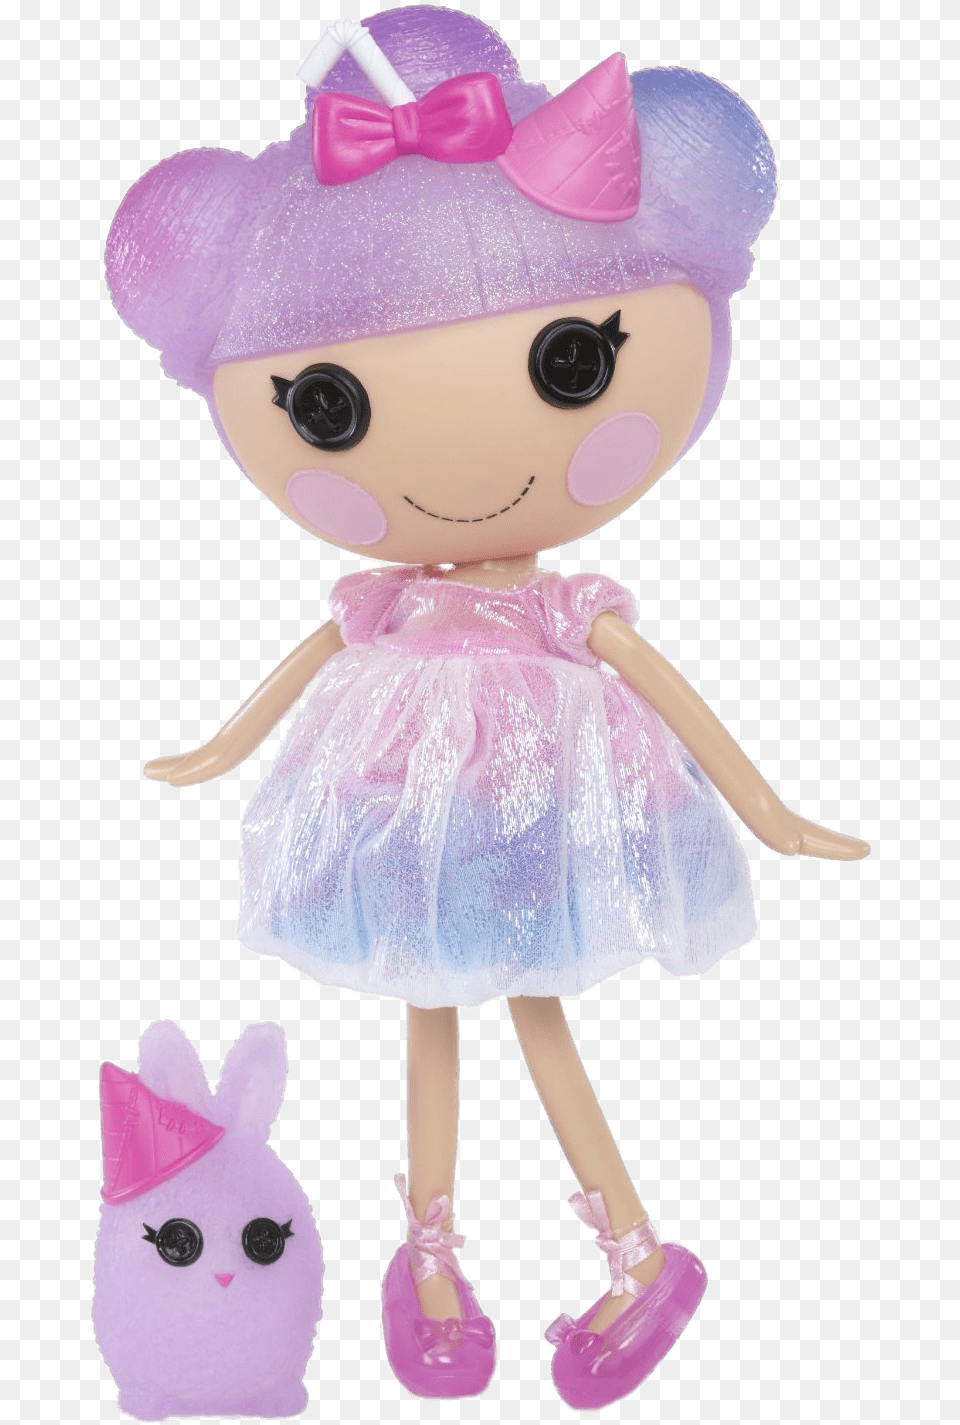 Lalaloopsy Frost I Lalaloopsy Frost Ic Cone, Doll, Toy, Clothing, Footwear Png Image